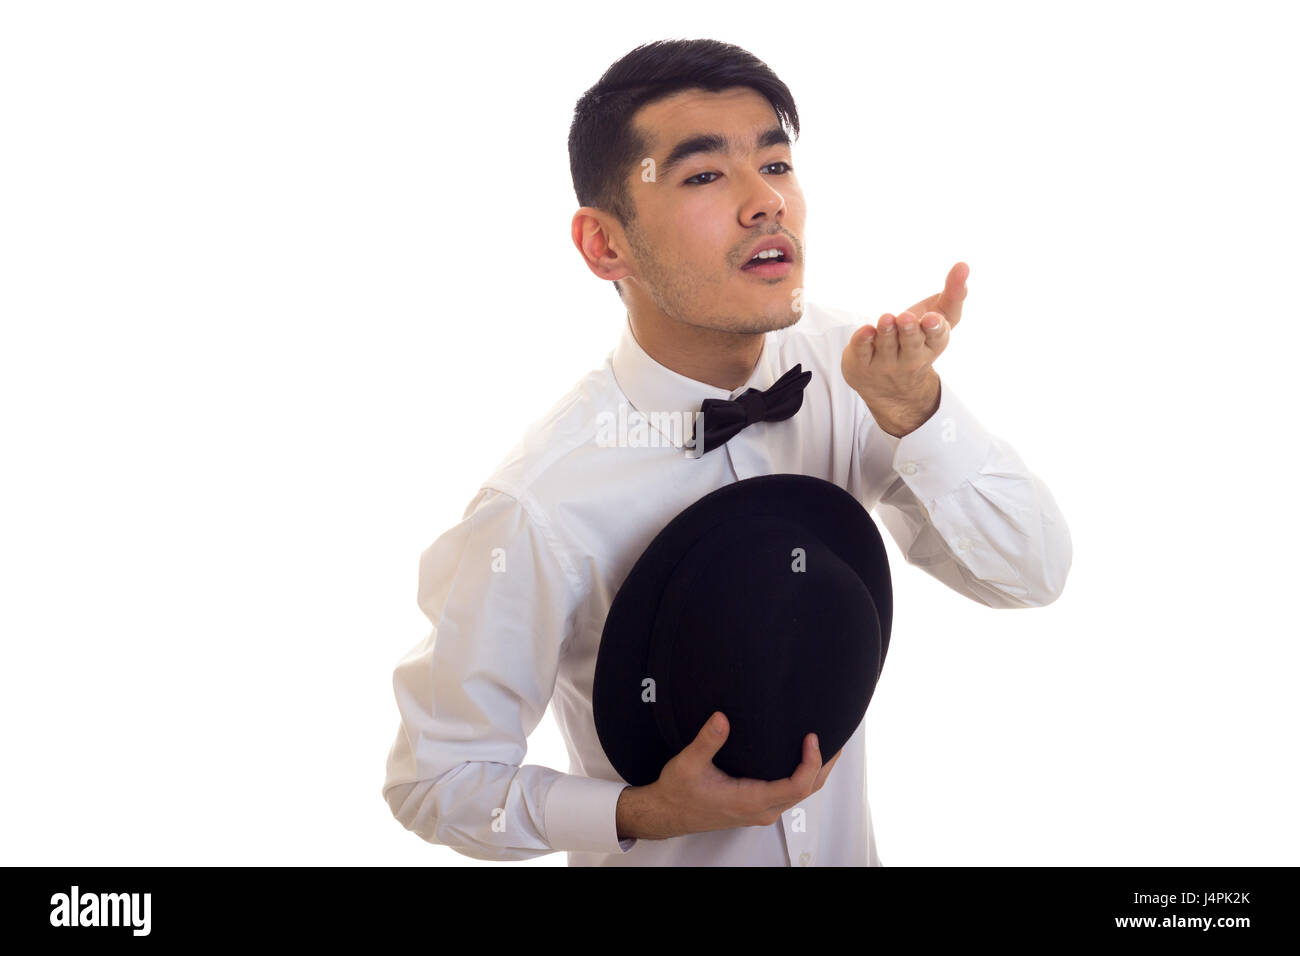 Young man in white T-shirt with black hat Stock Photo